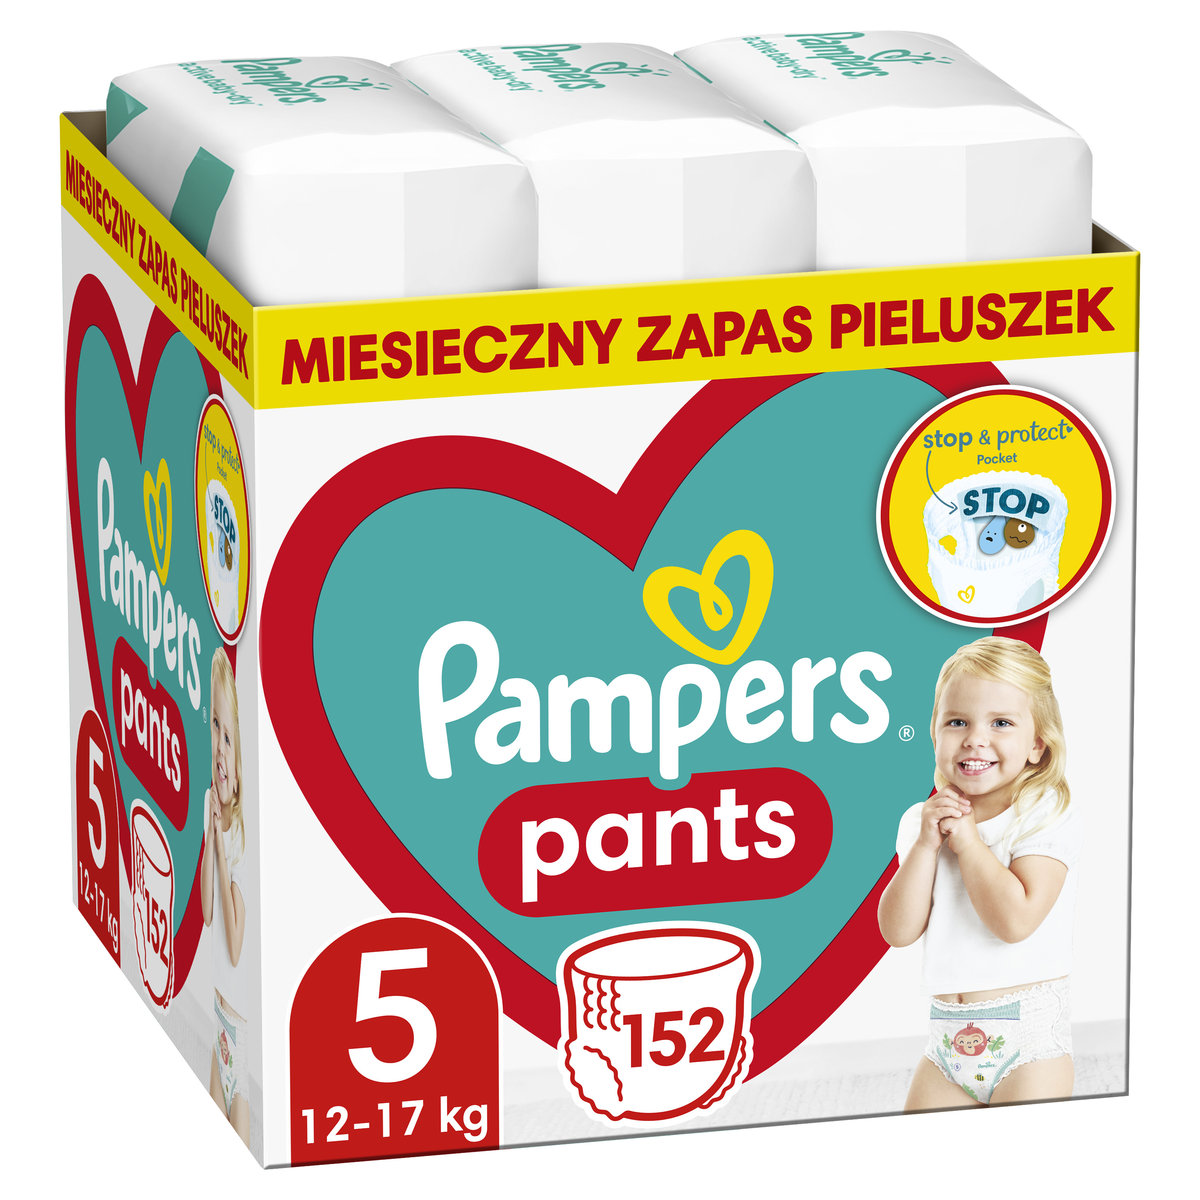 pampers 2 new baby 144